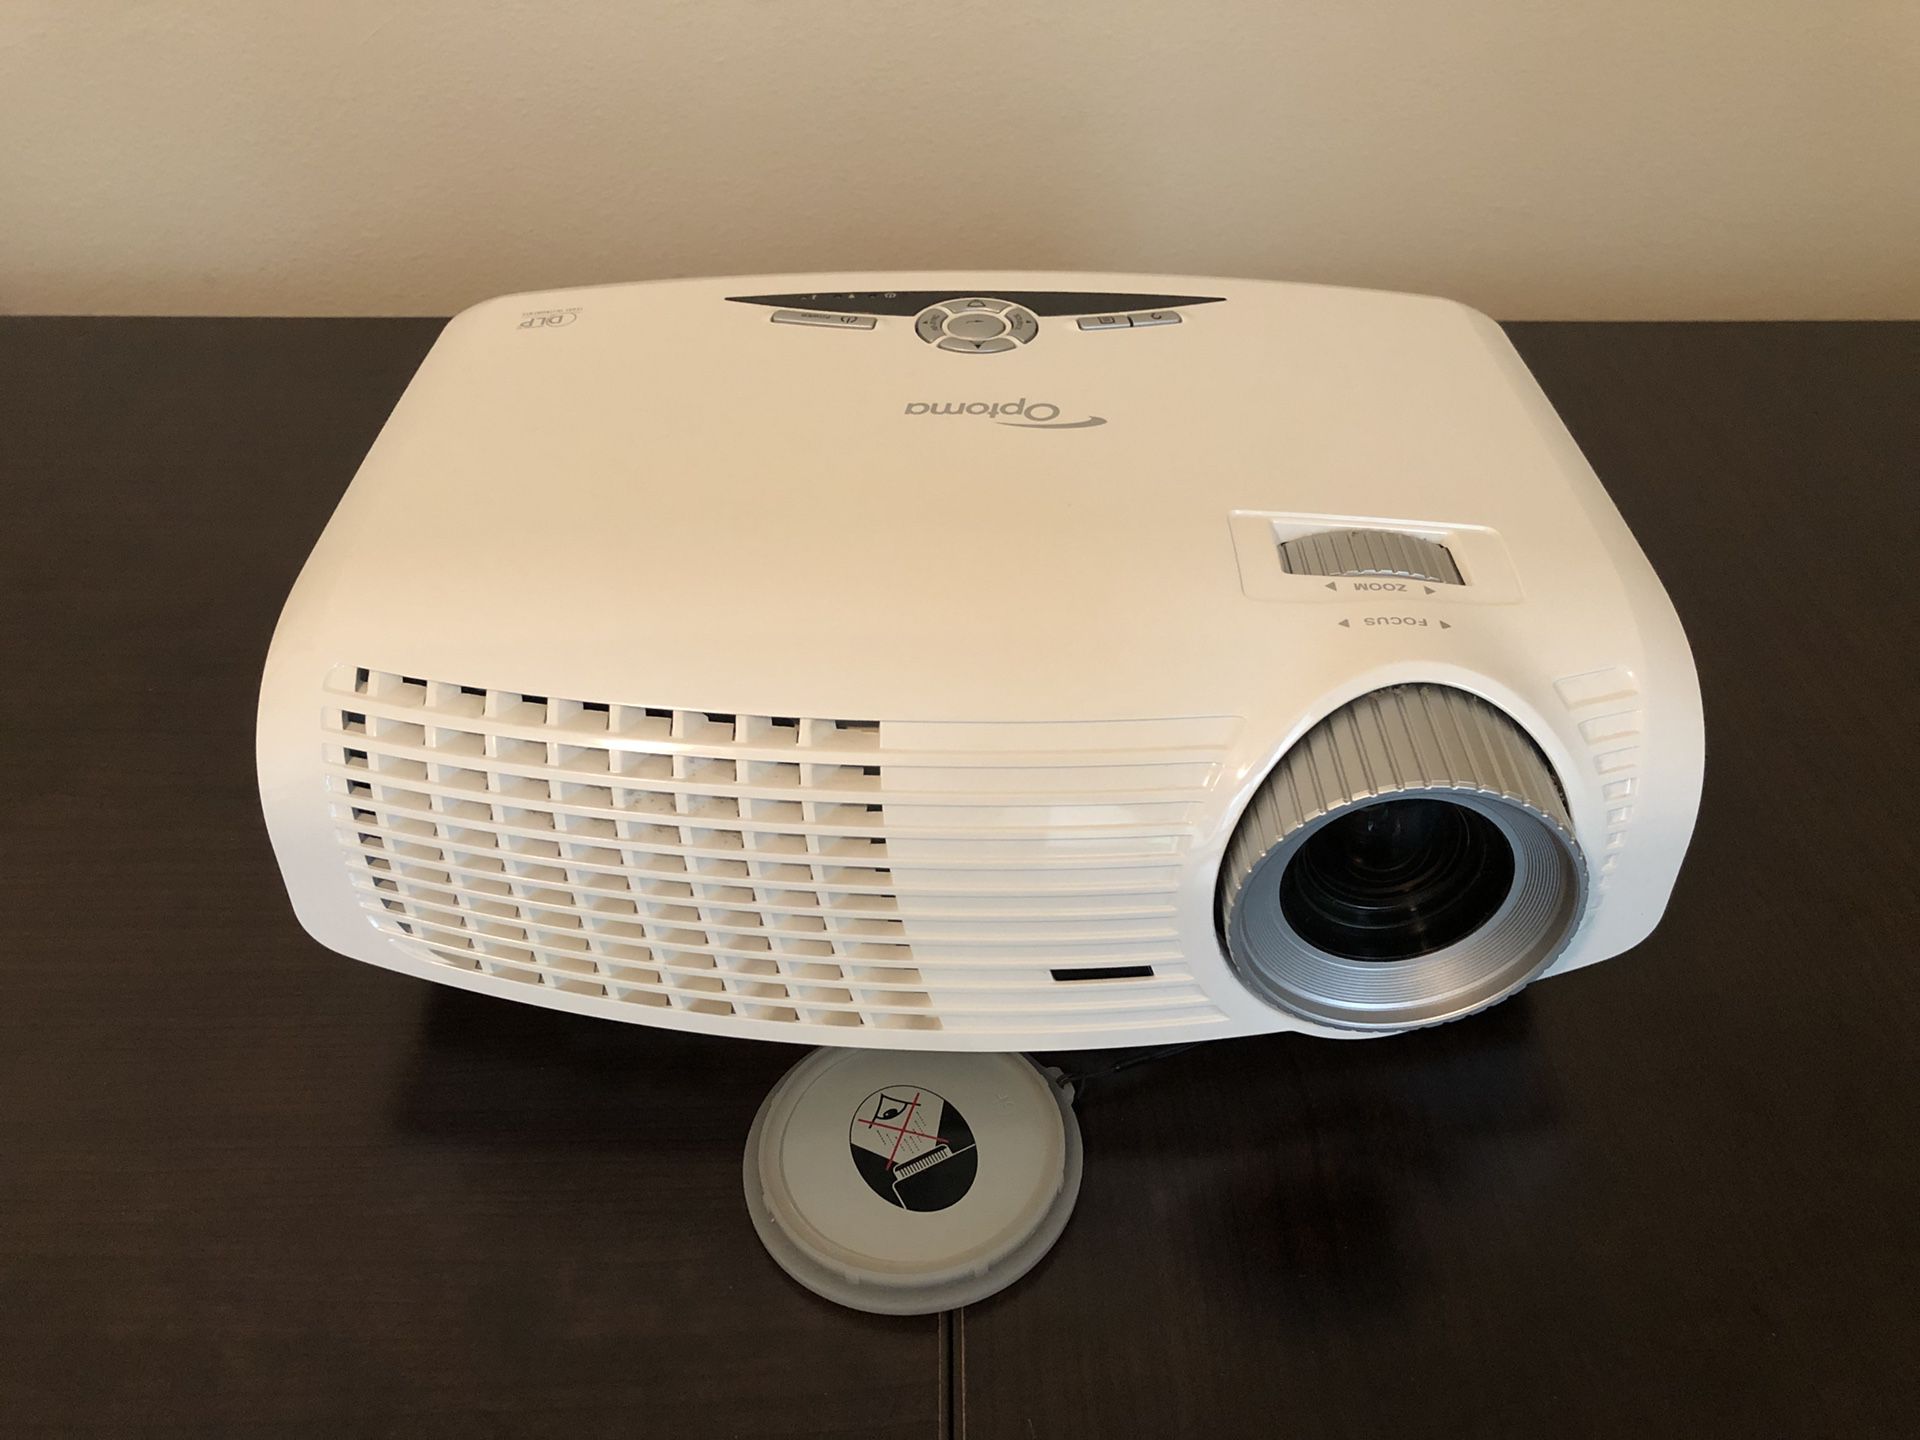 Optoma HD25-LV HD 1080p DLP 3D Home Theater Projector for Sale in